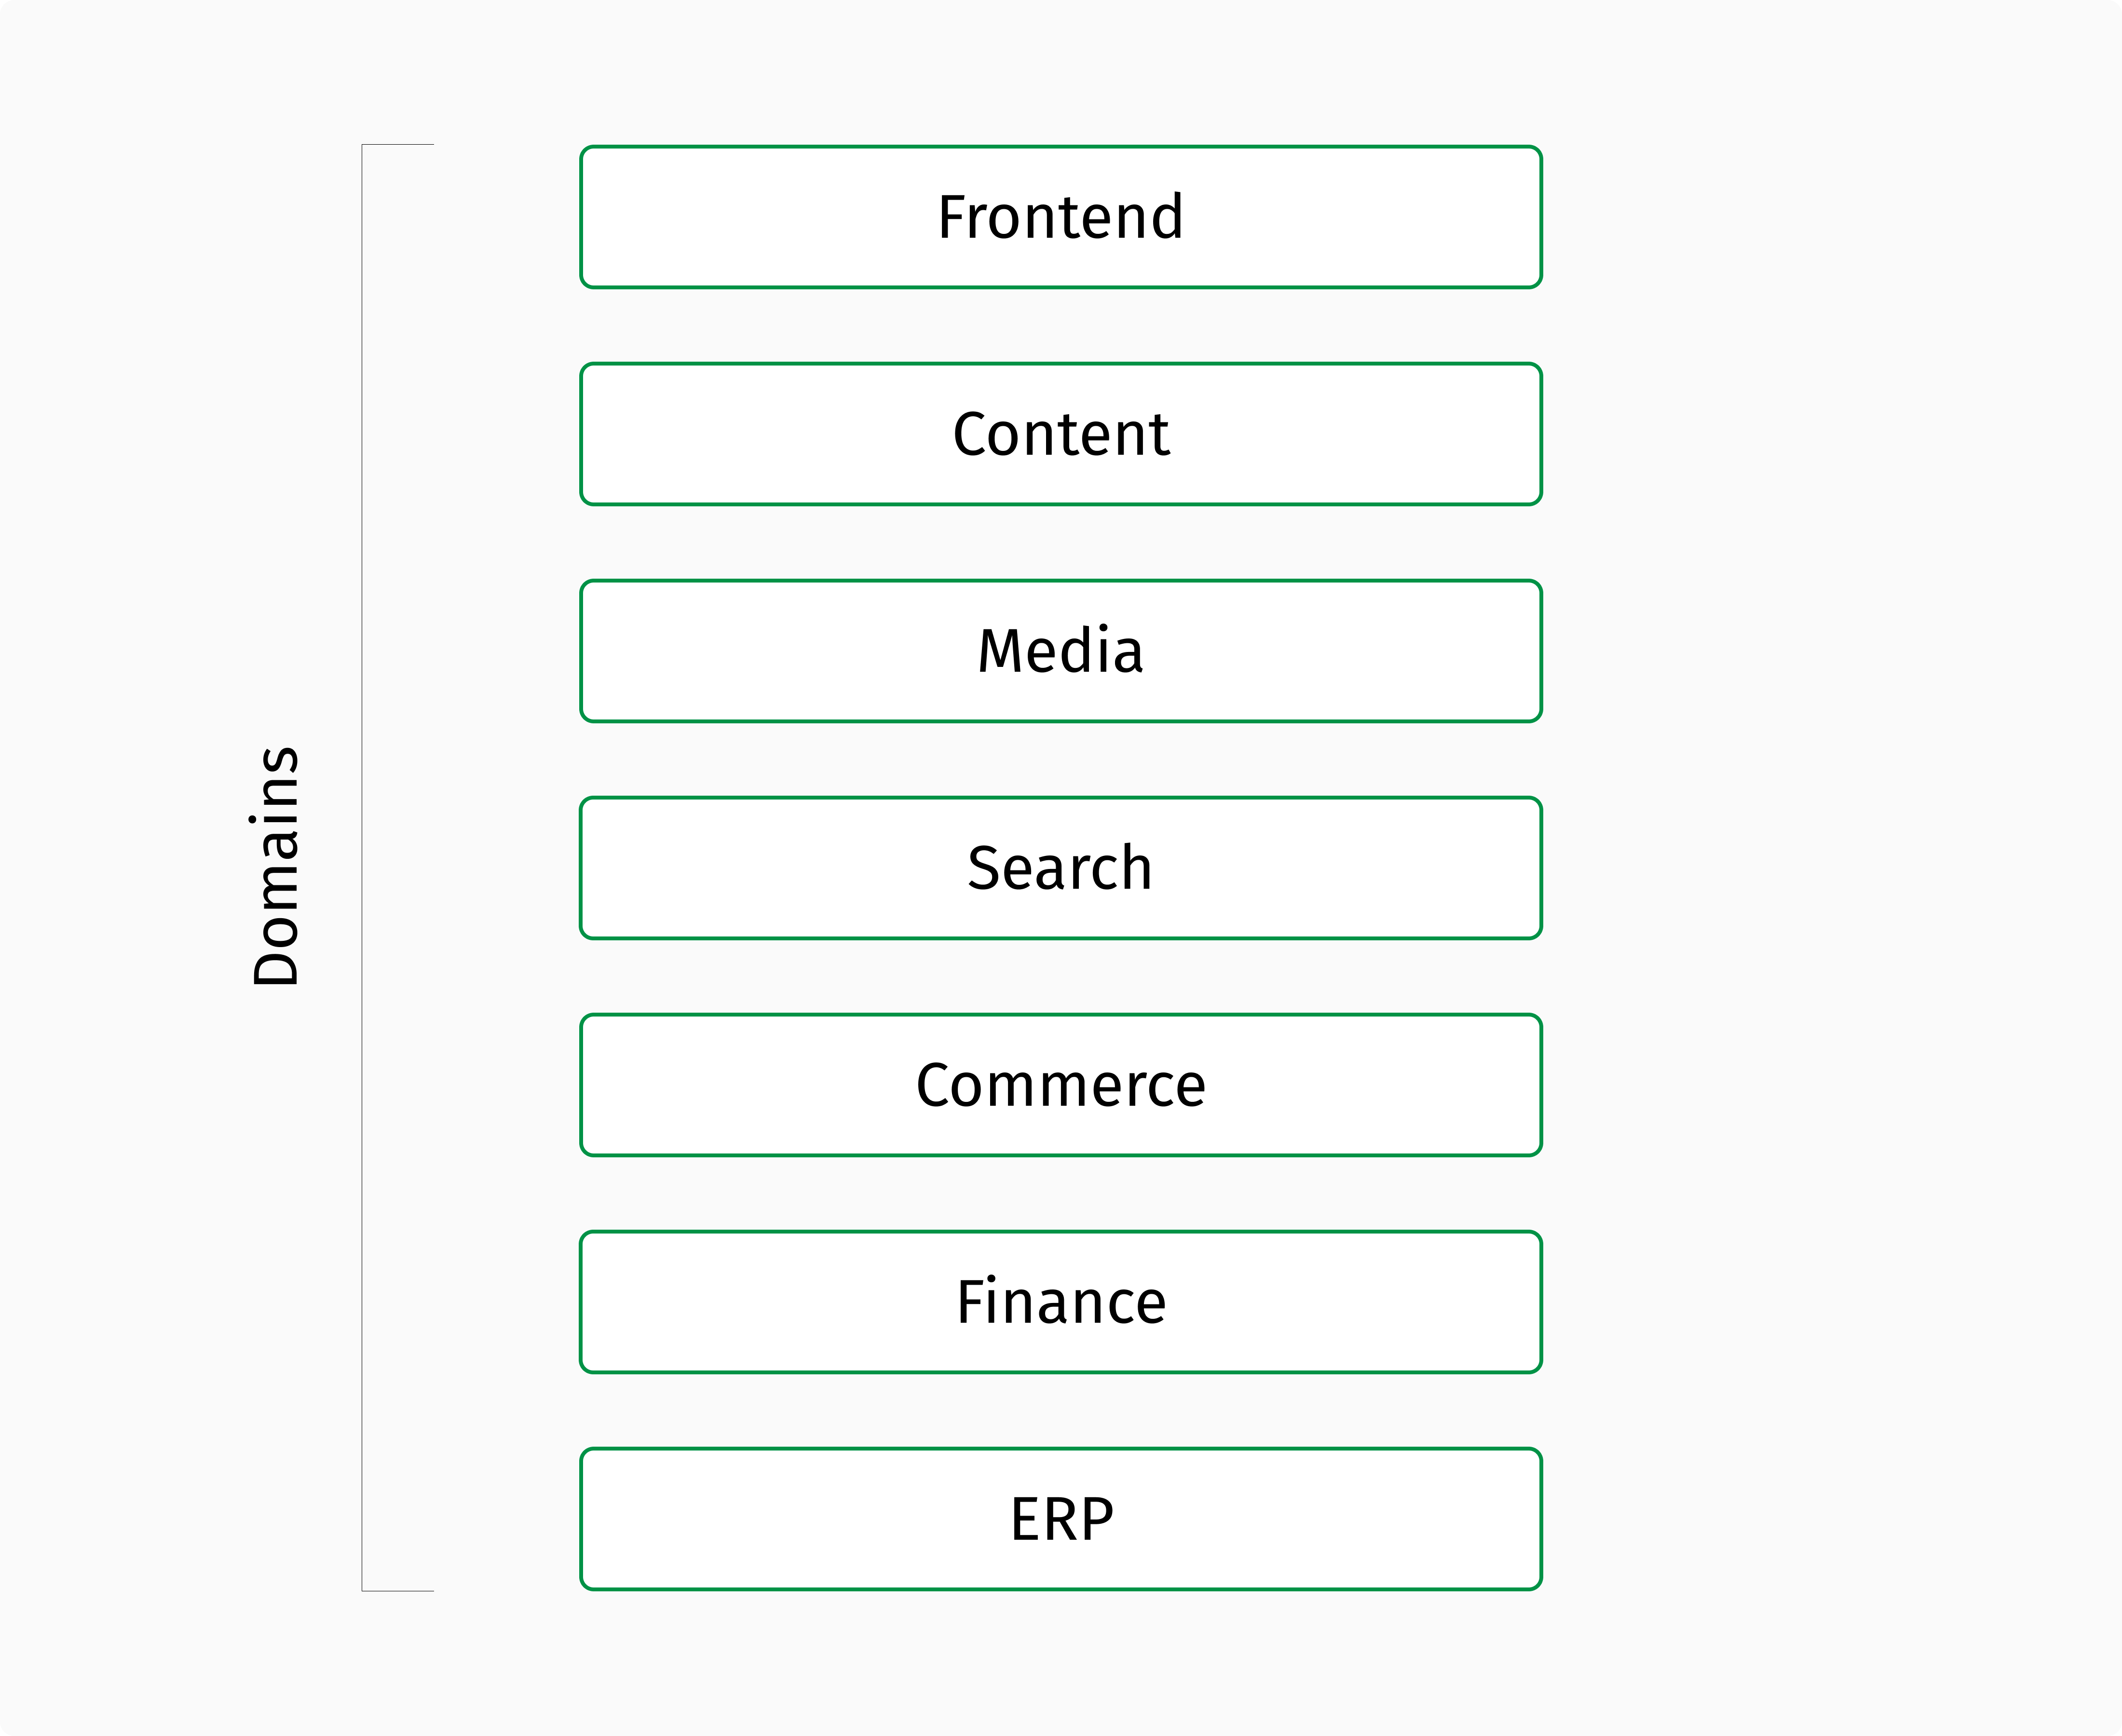 Unified approach: one platform for each domain.